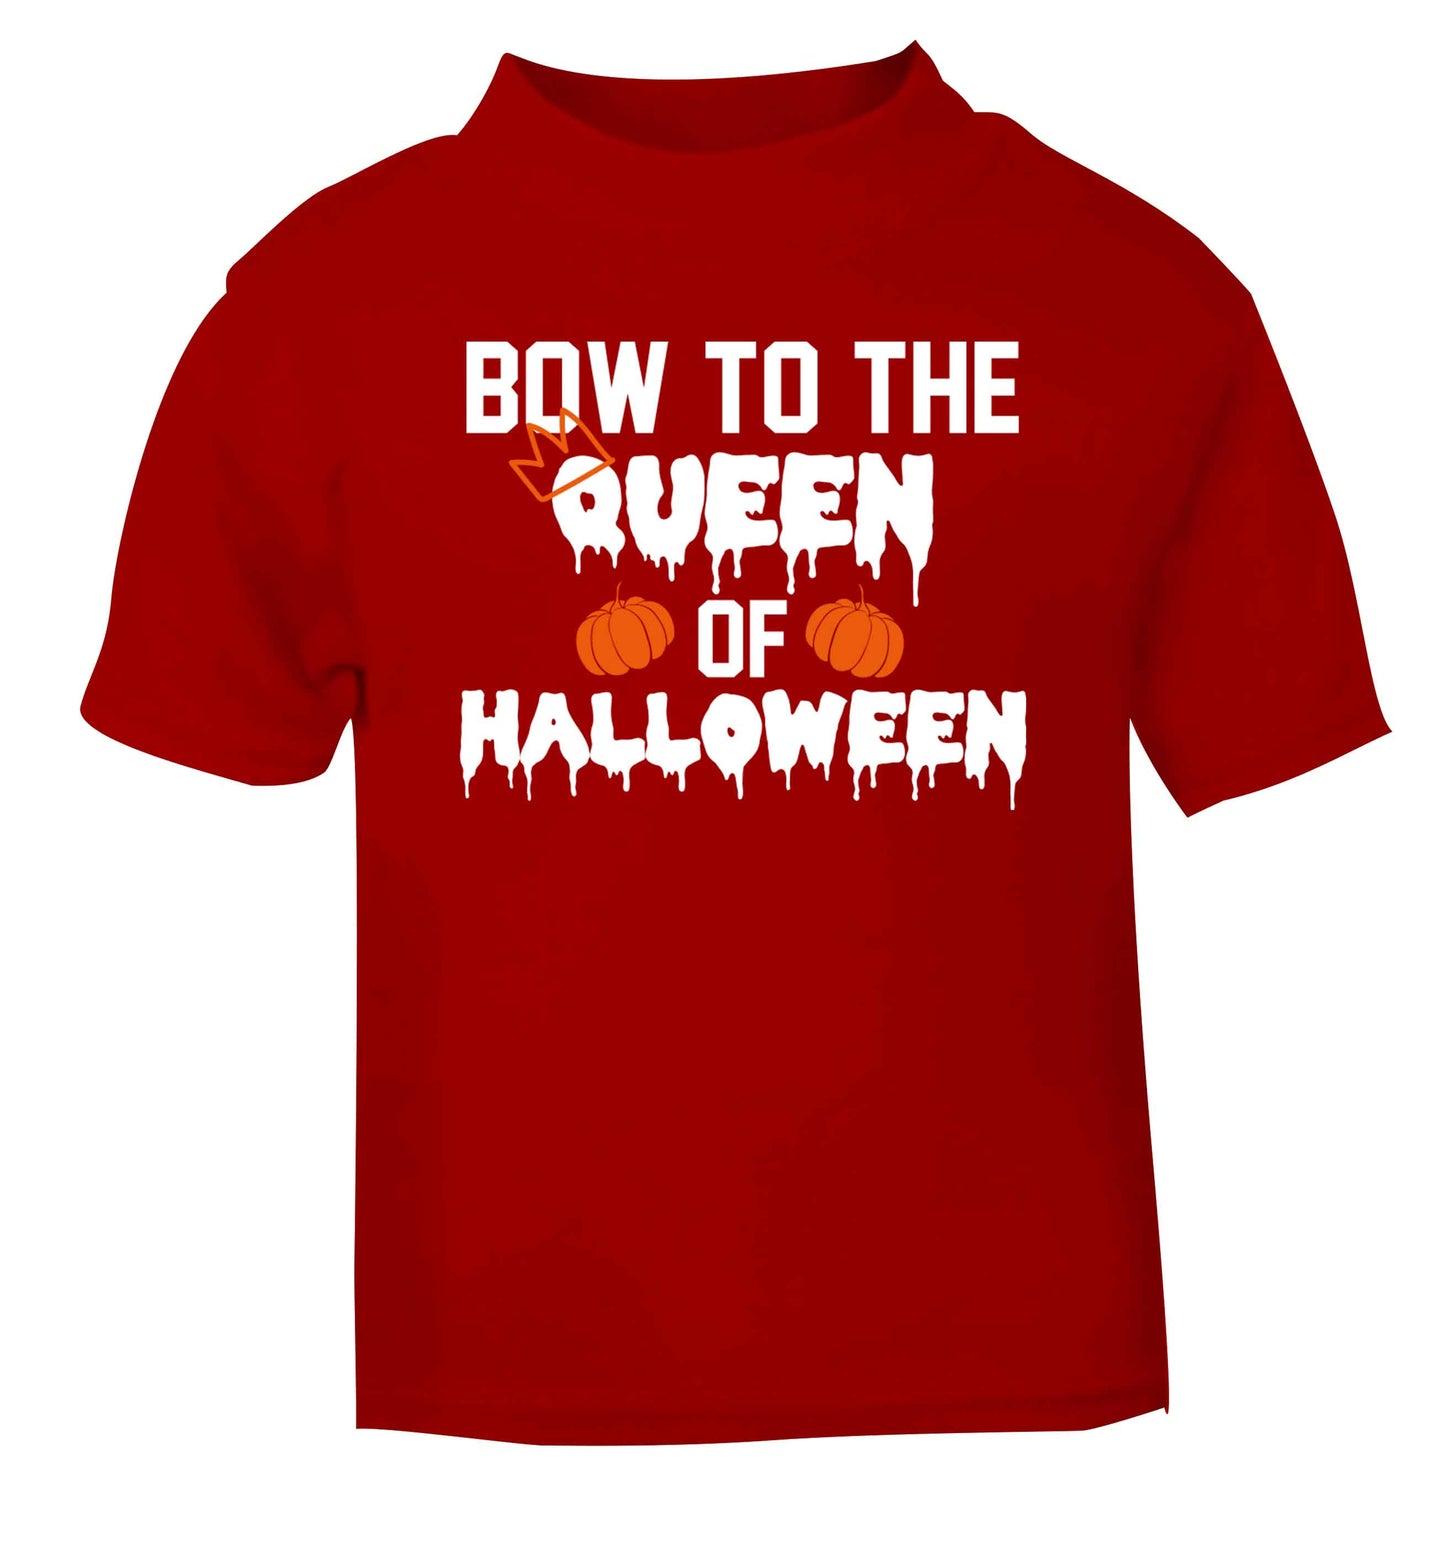 Bow to the Queen of halloween red baby toddler Tshirt 2 Years